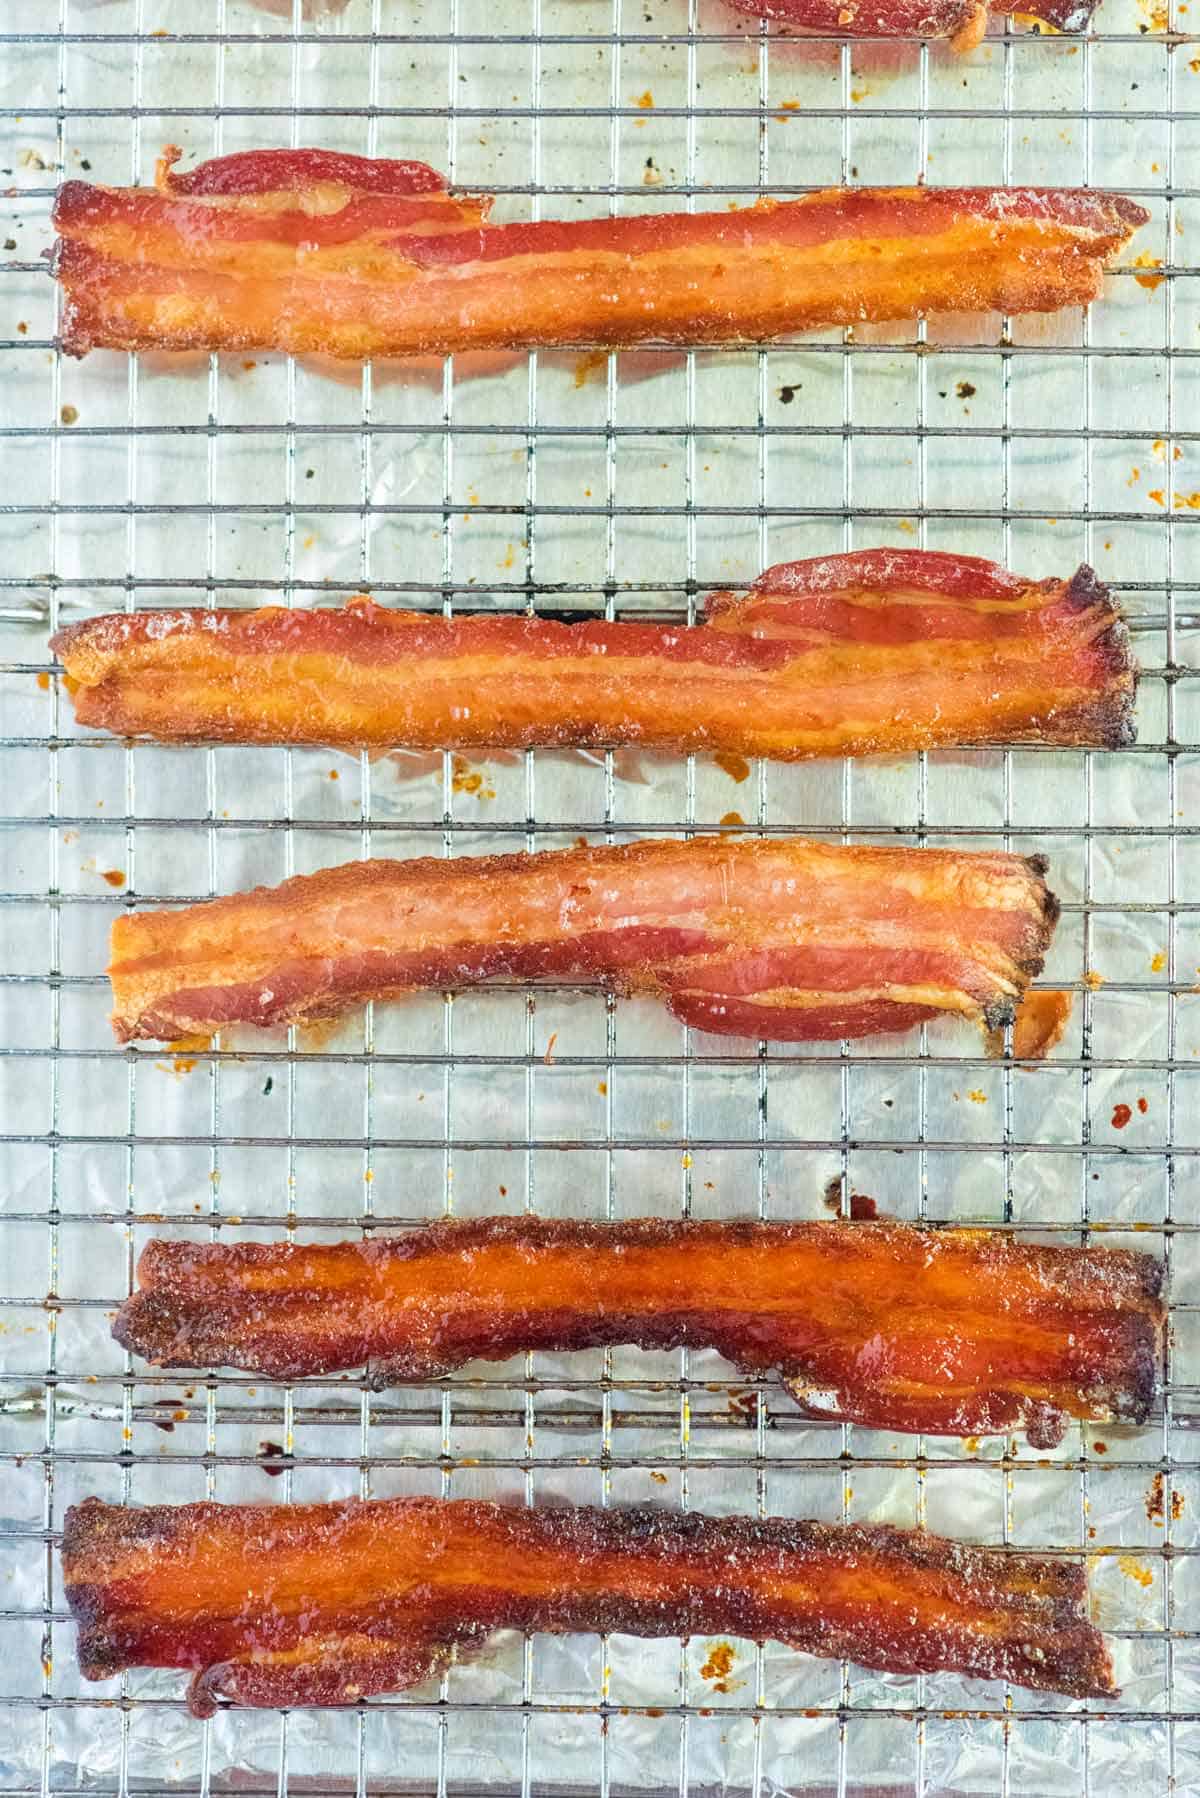 Baked Bacon with Different Glazes